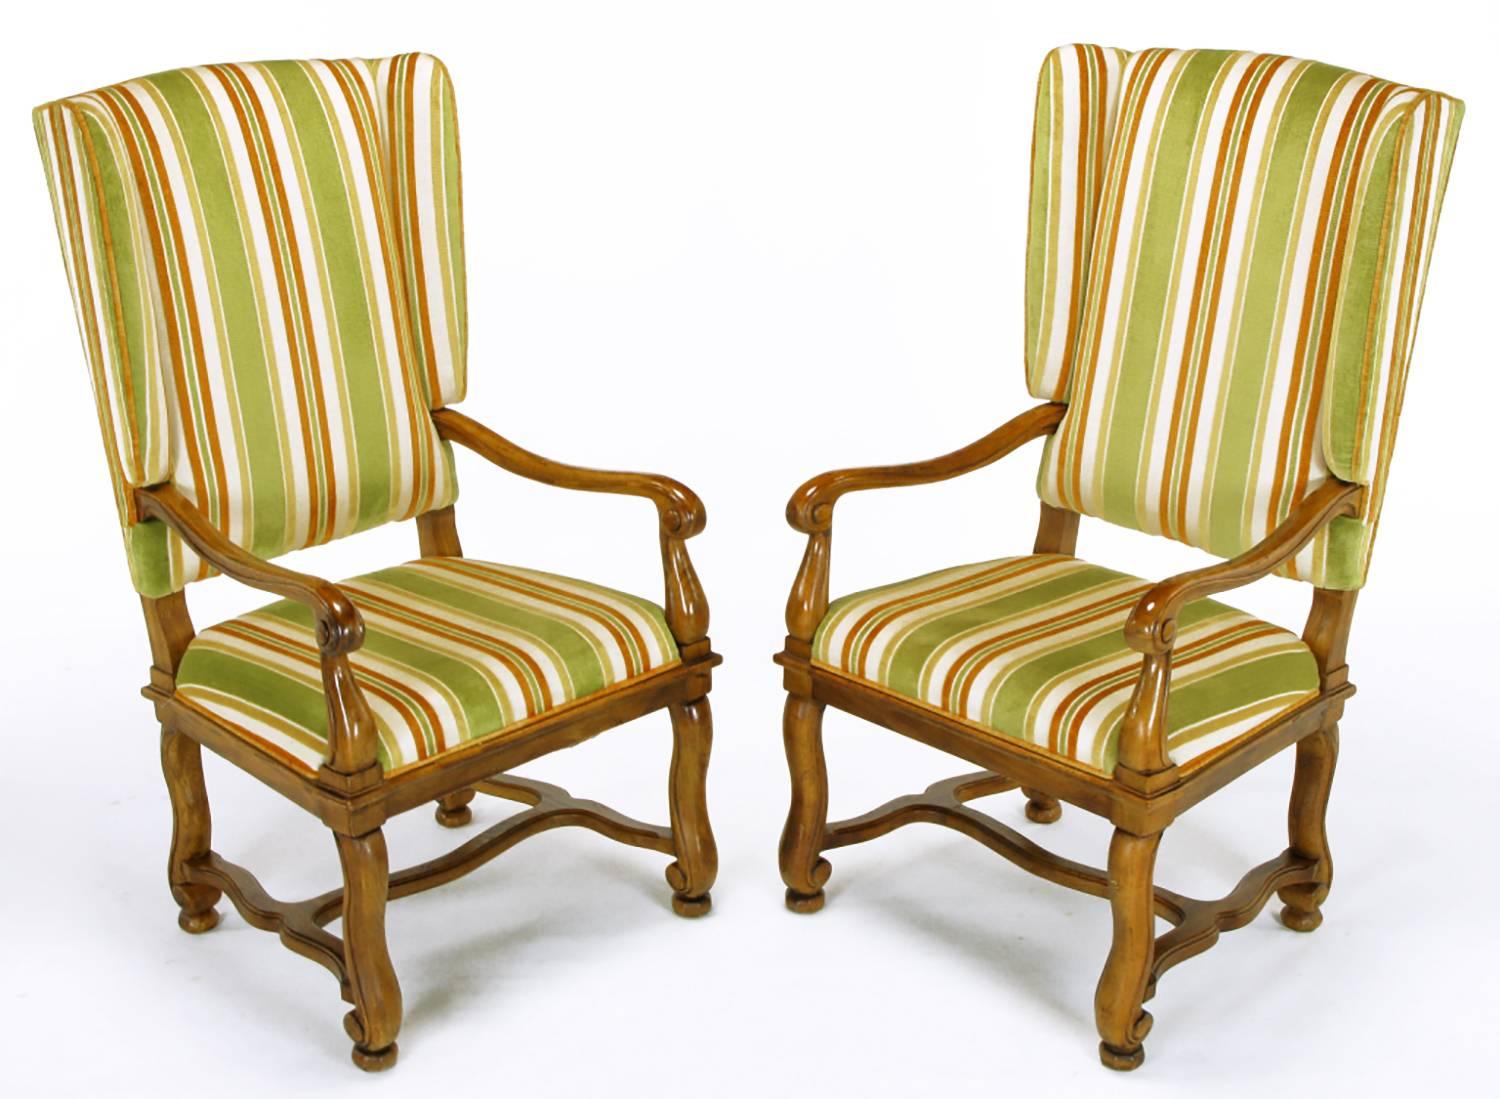 Pair of Heritage Furniture, Louis XIV inspired, winged fauteuils. Carved and patinated walnut frames with curved arms and legs with H stretchers. Original cut velvet upholstery striped in olive green, umber and taupe.

Measures: Arm height 25